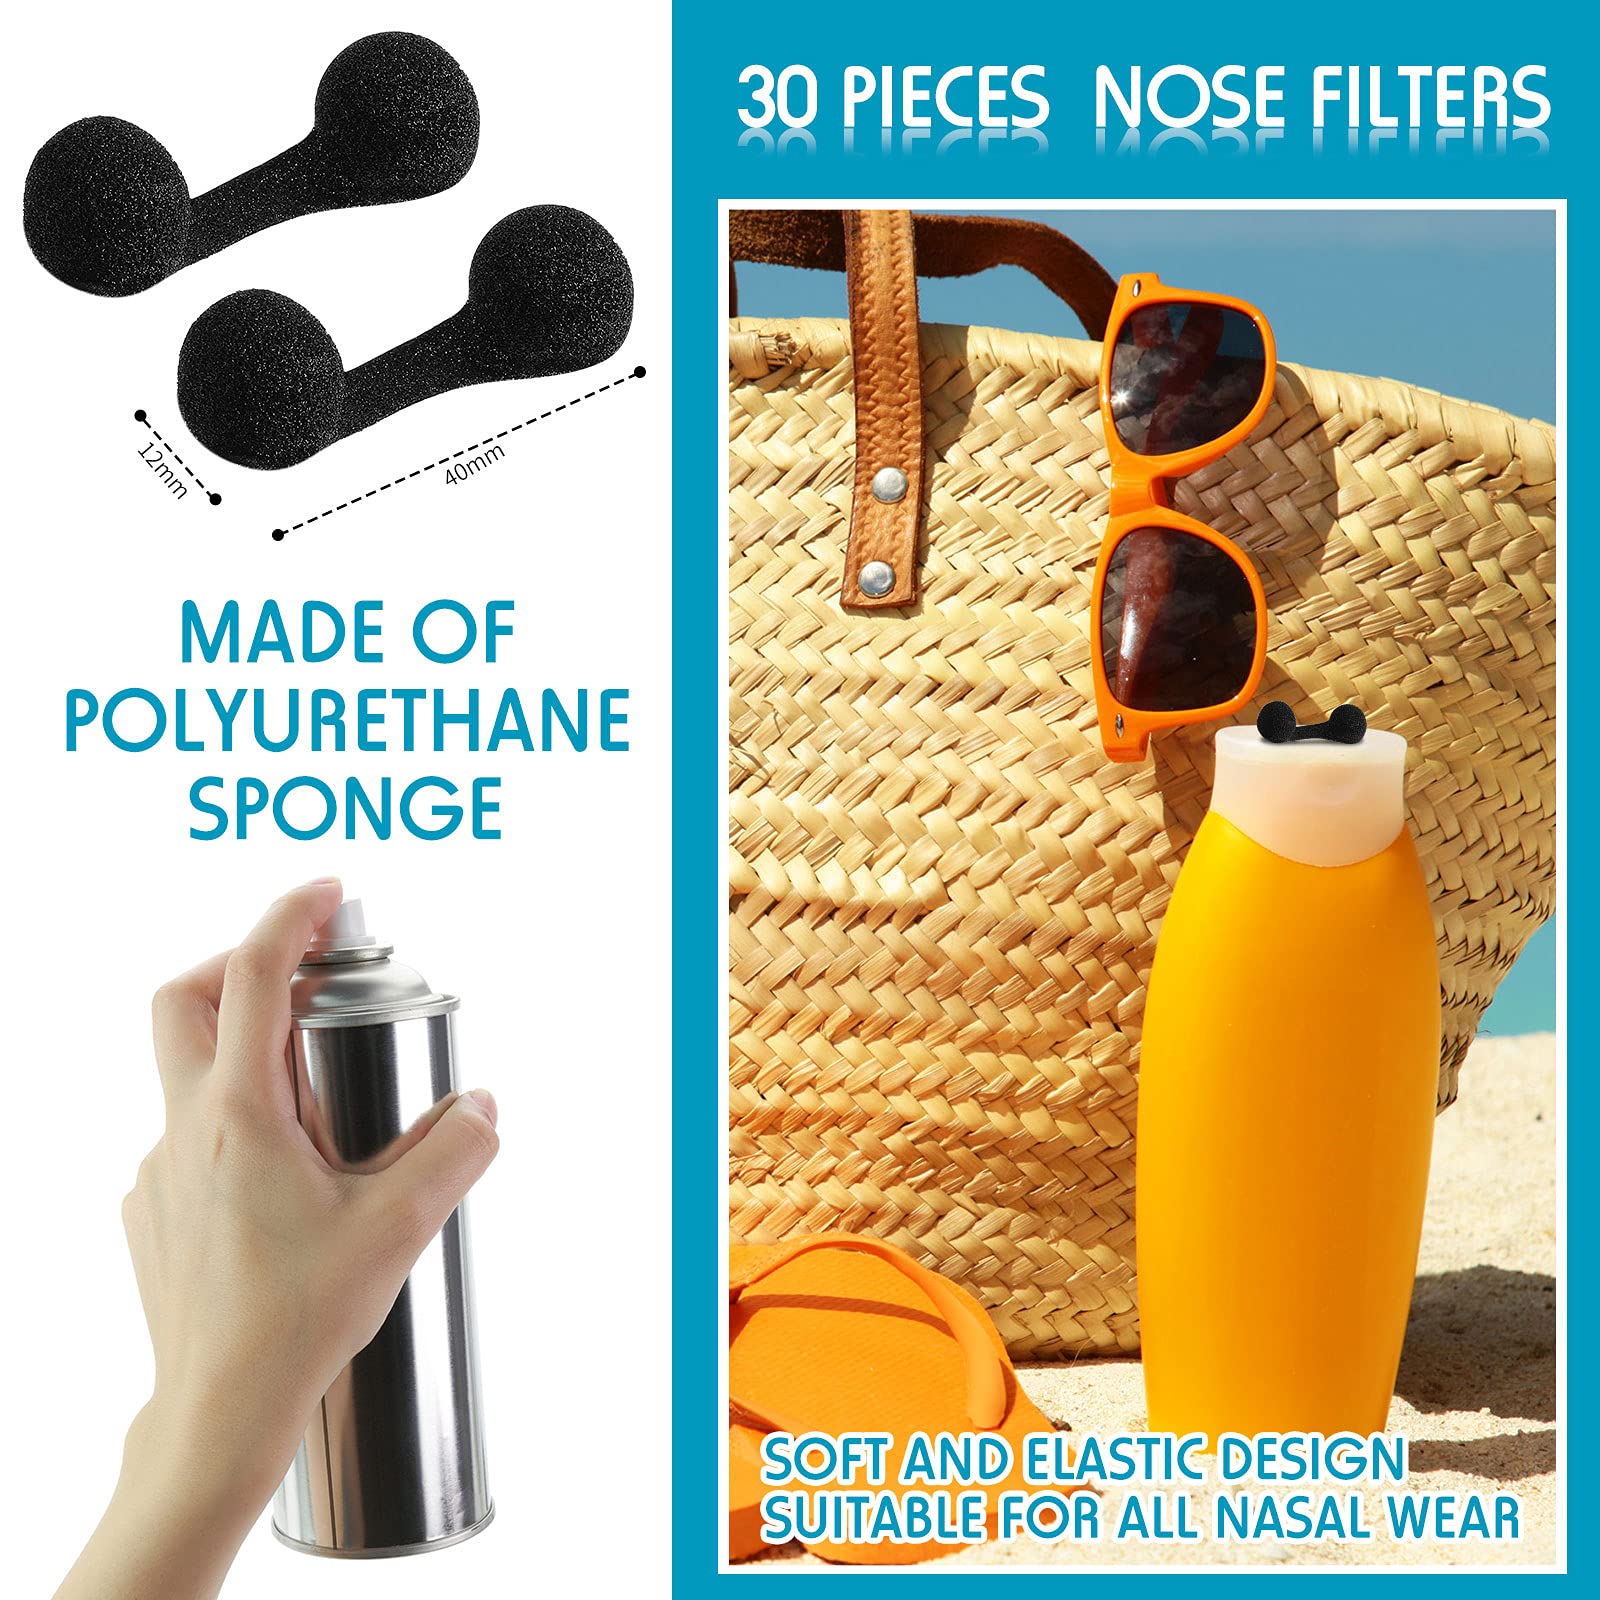 30 Pieces Disposable Nose Filters Spray Tanning With Softness Sponge Nose Filter for Sunless Nosebleed Airbrush Tanning